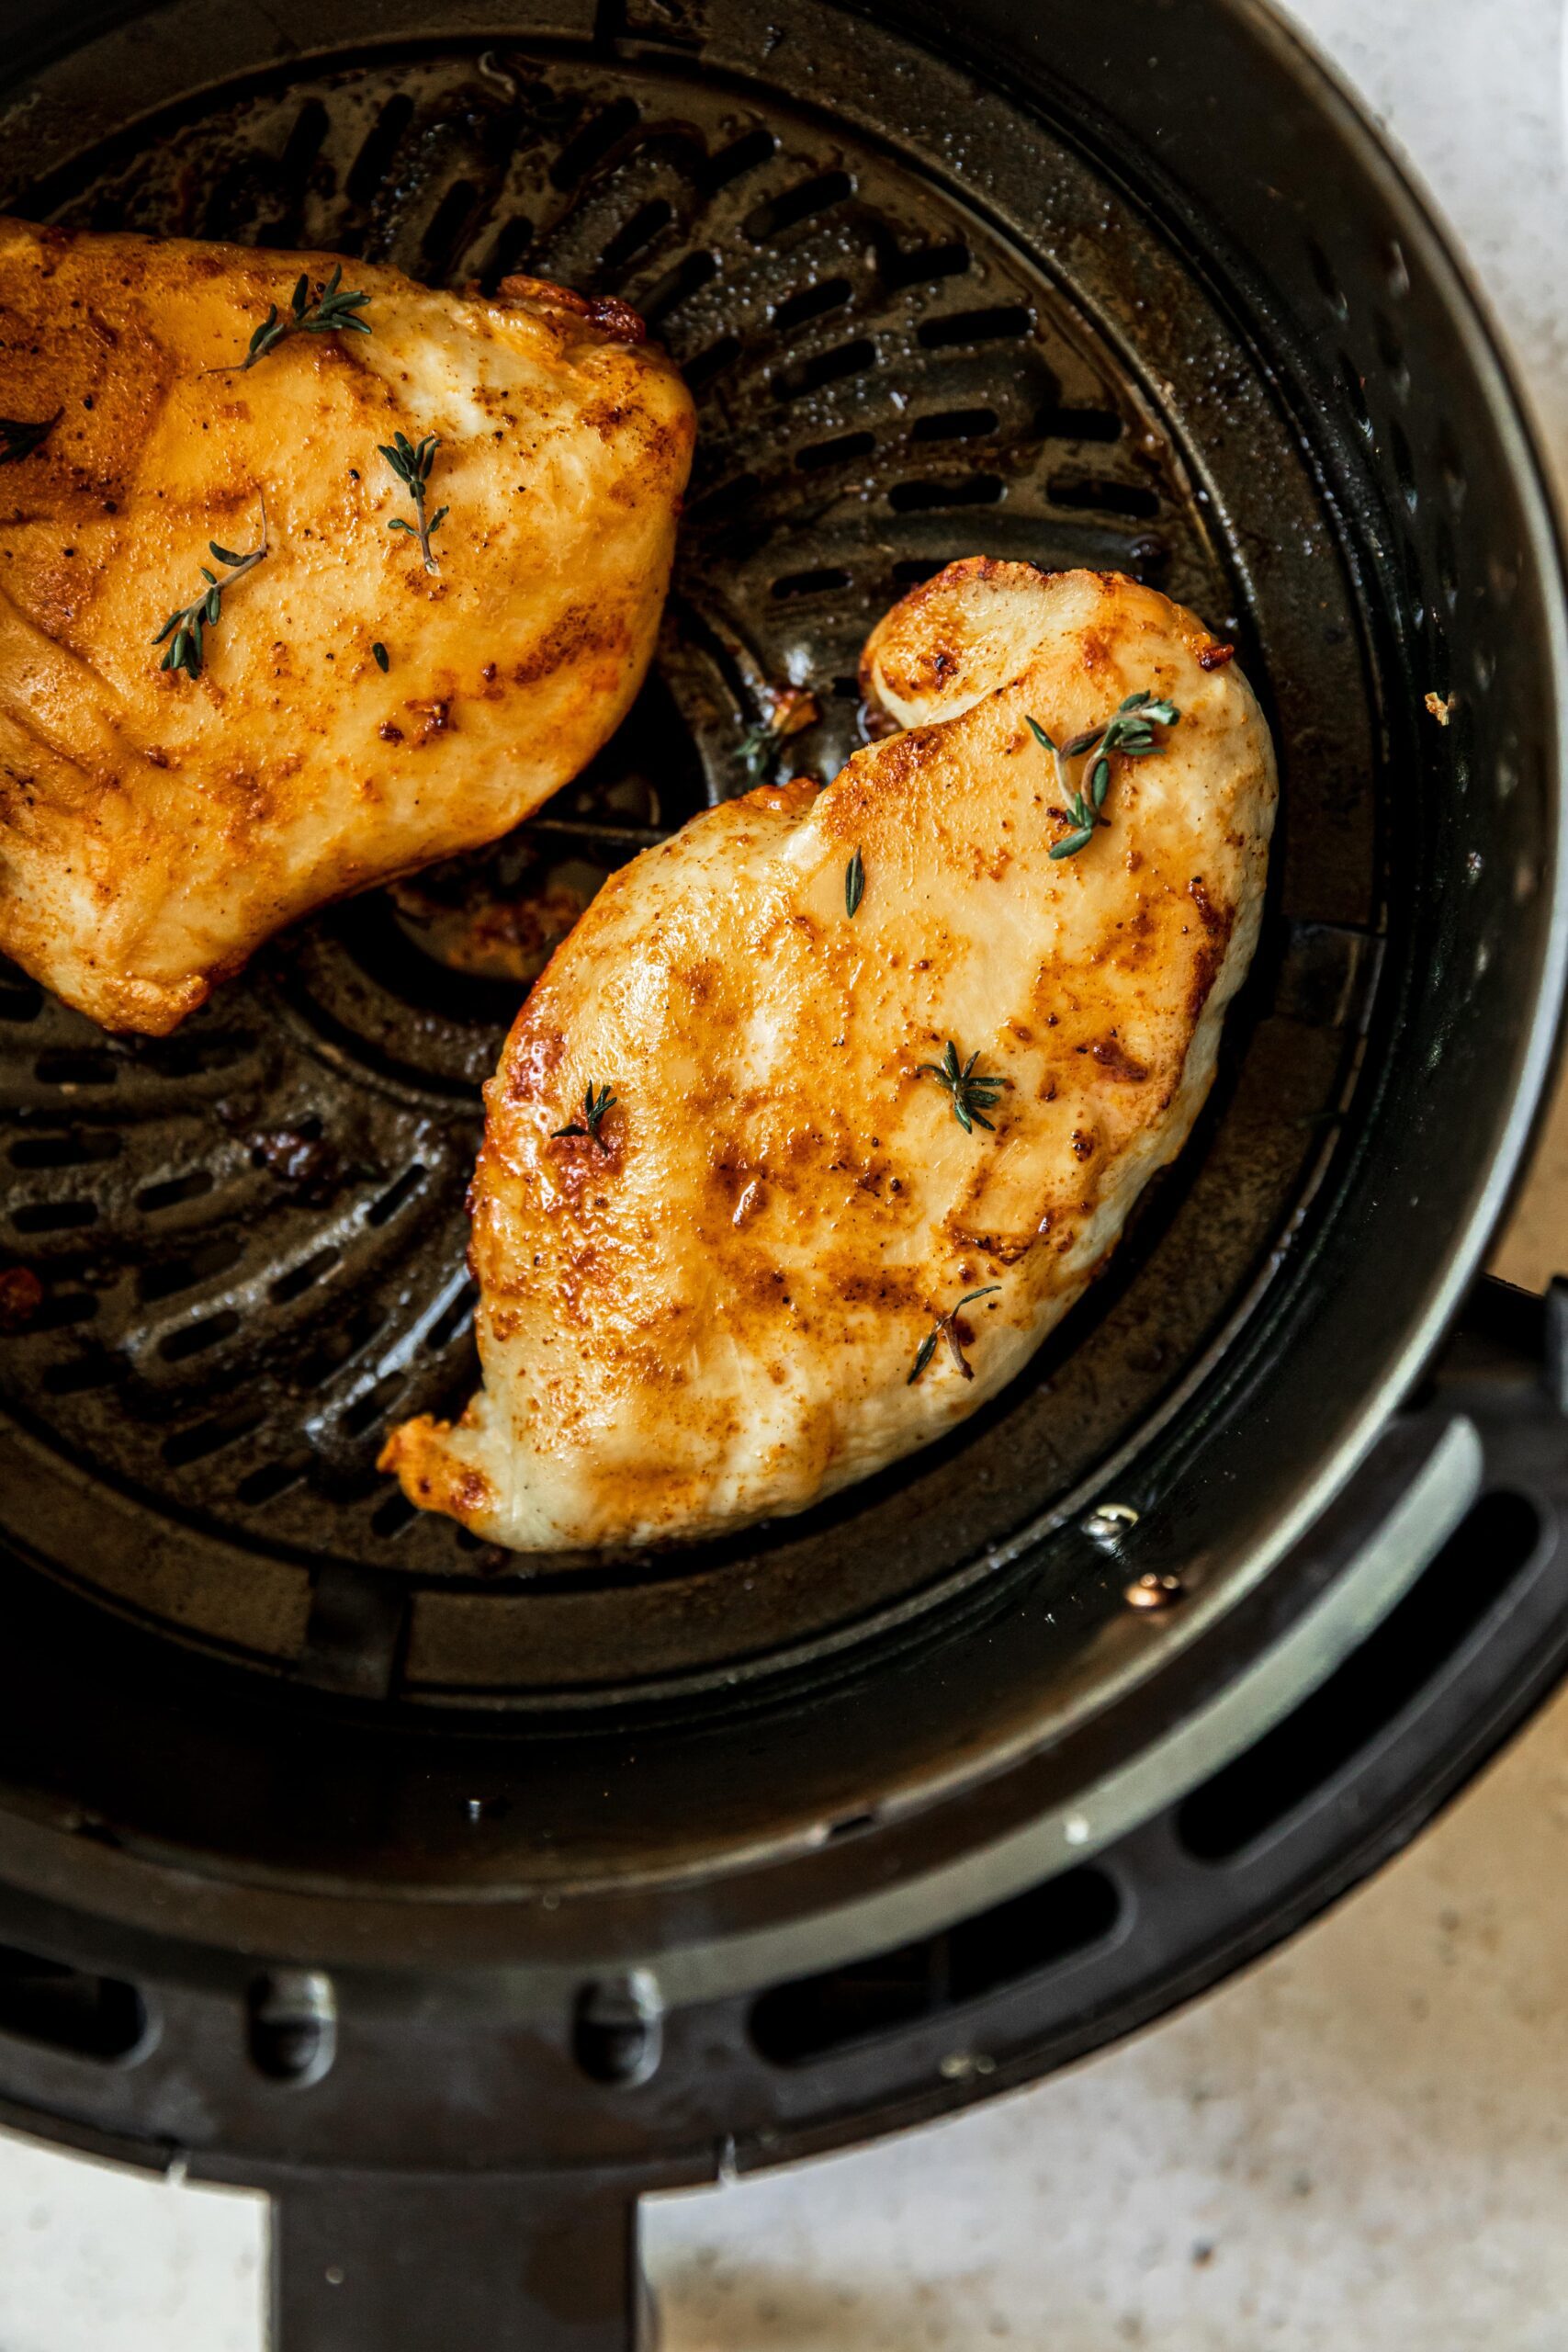 Cooked chicken breast in an air fryer.